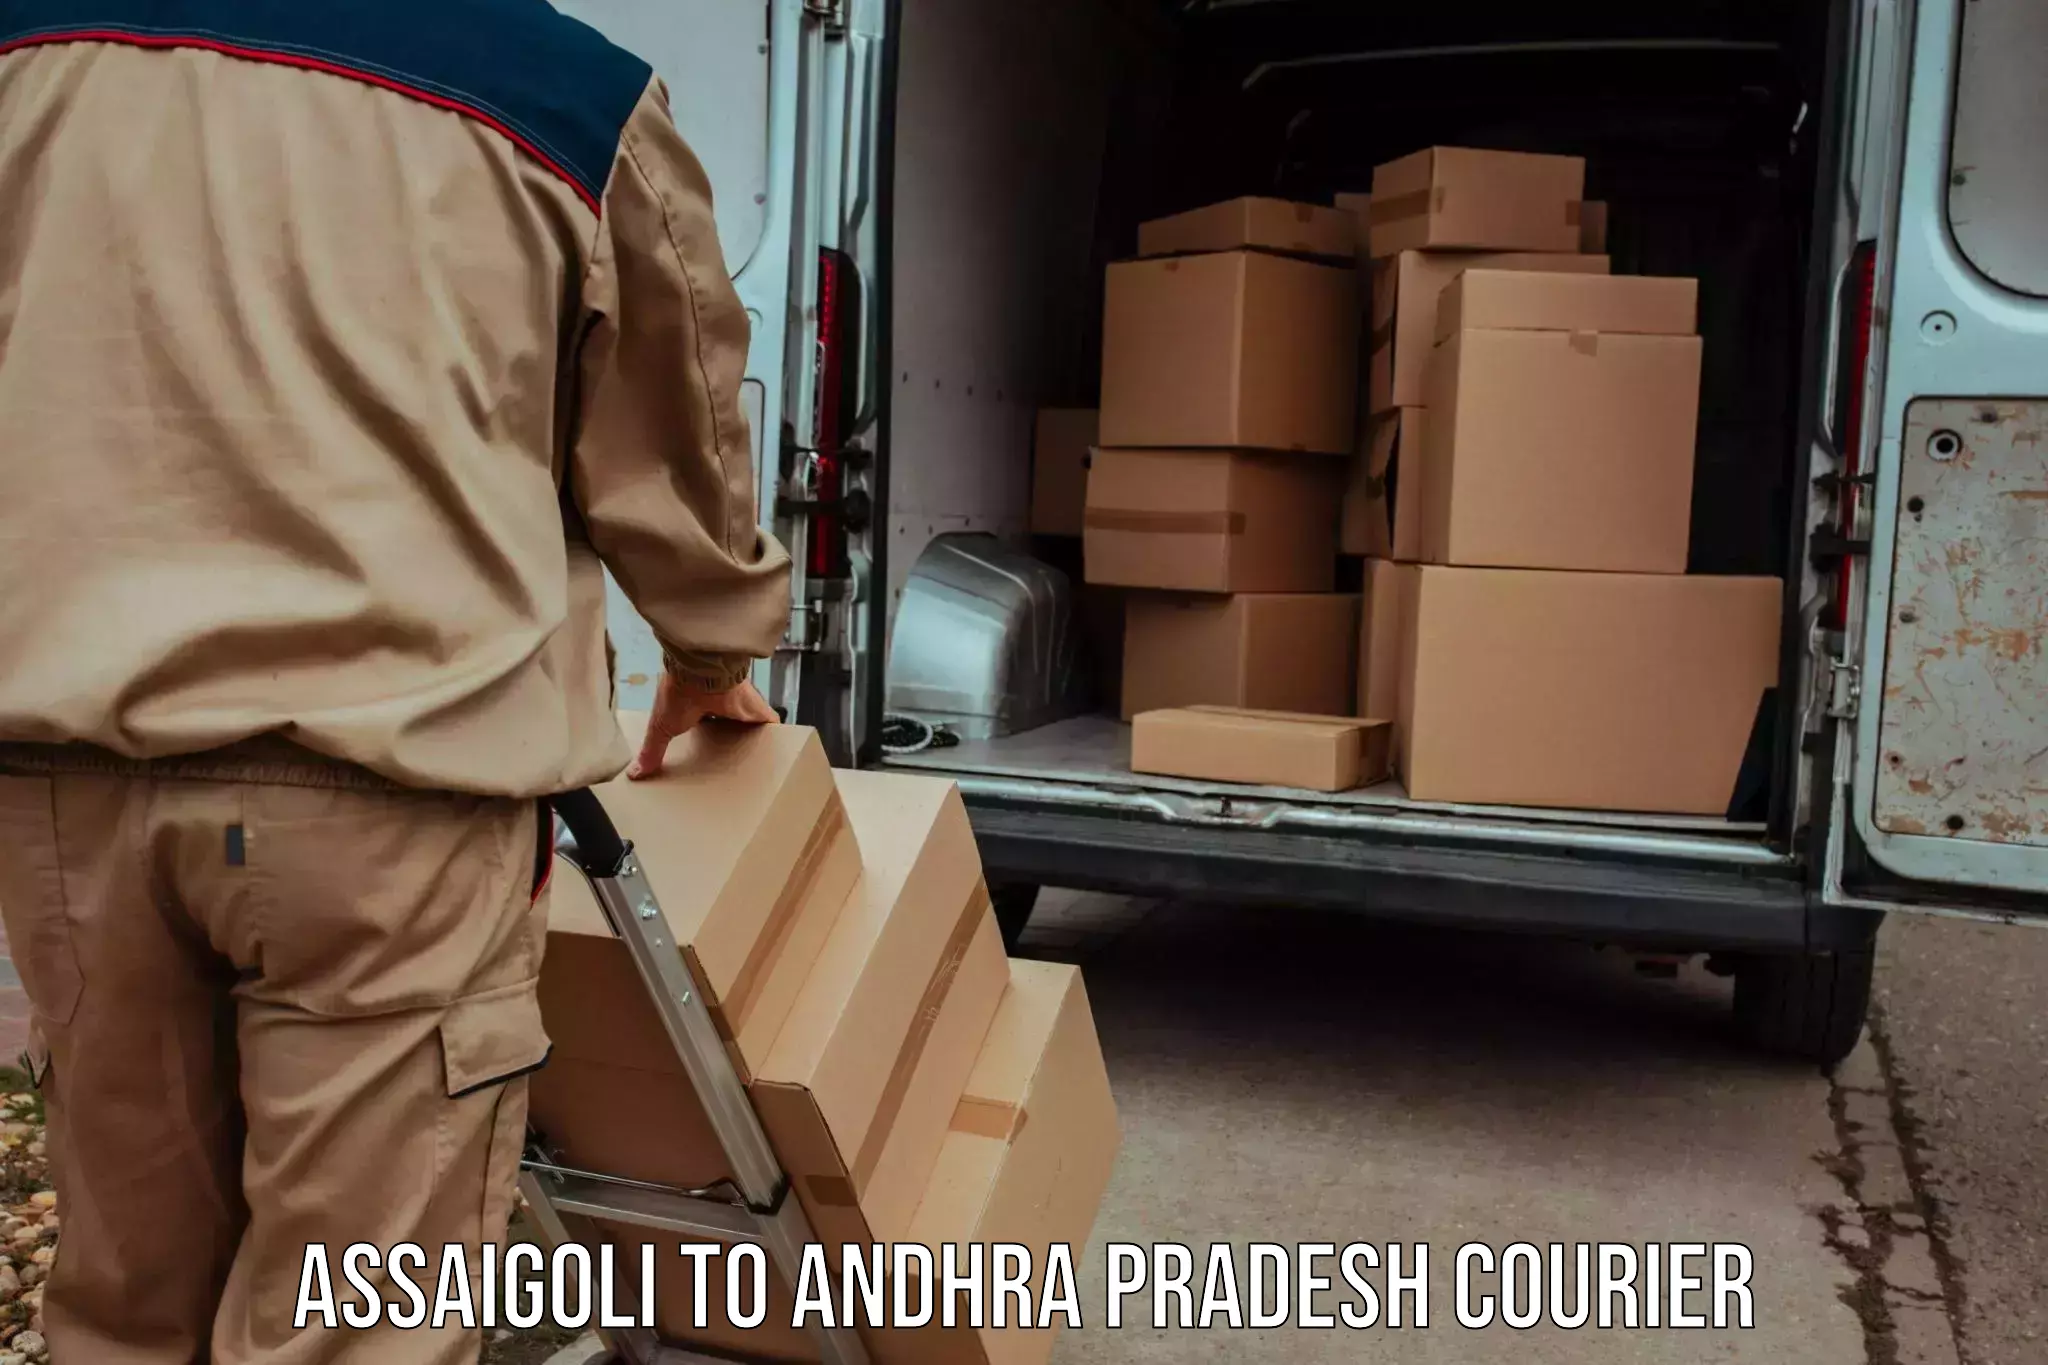 Personal courier services Assaigoli to Sirvella